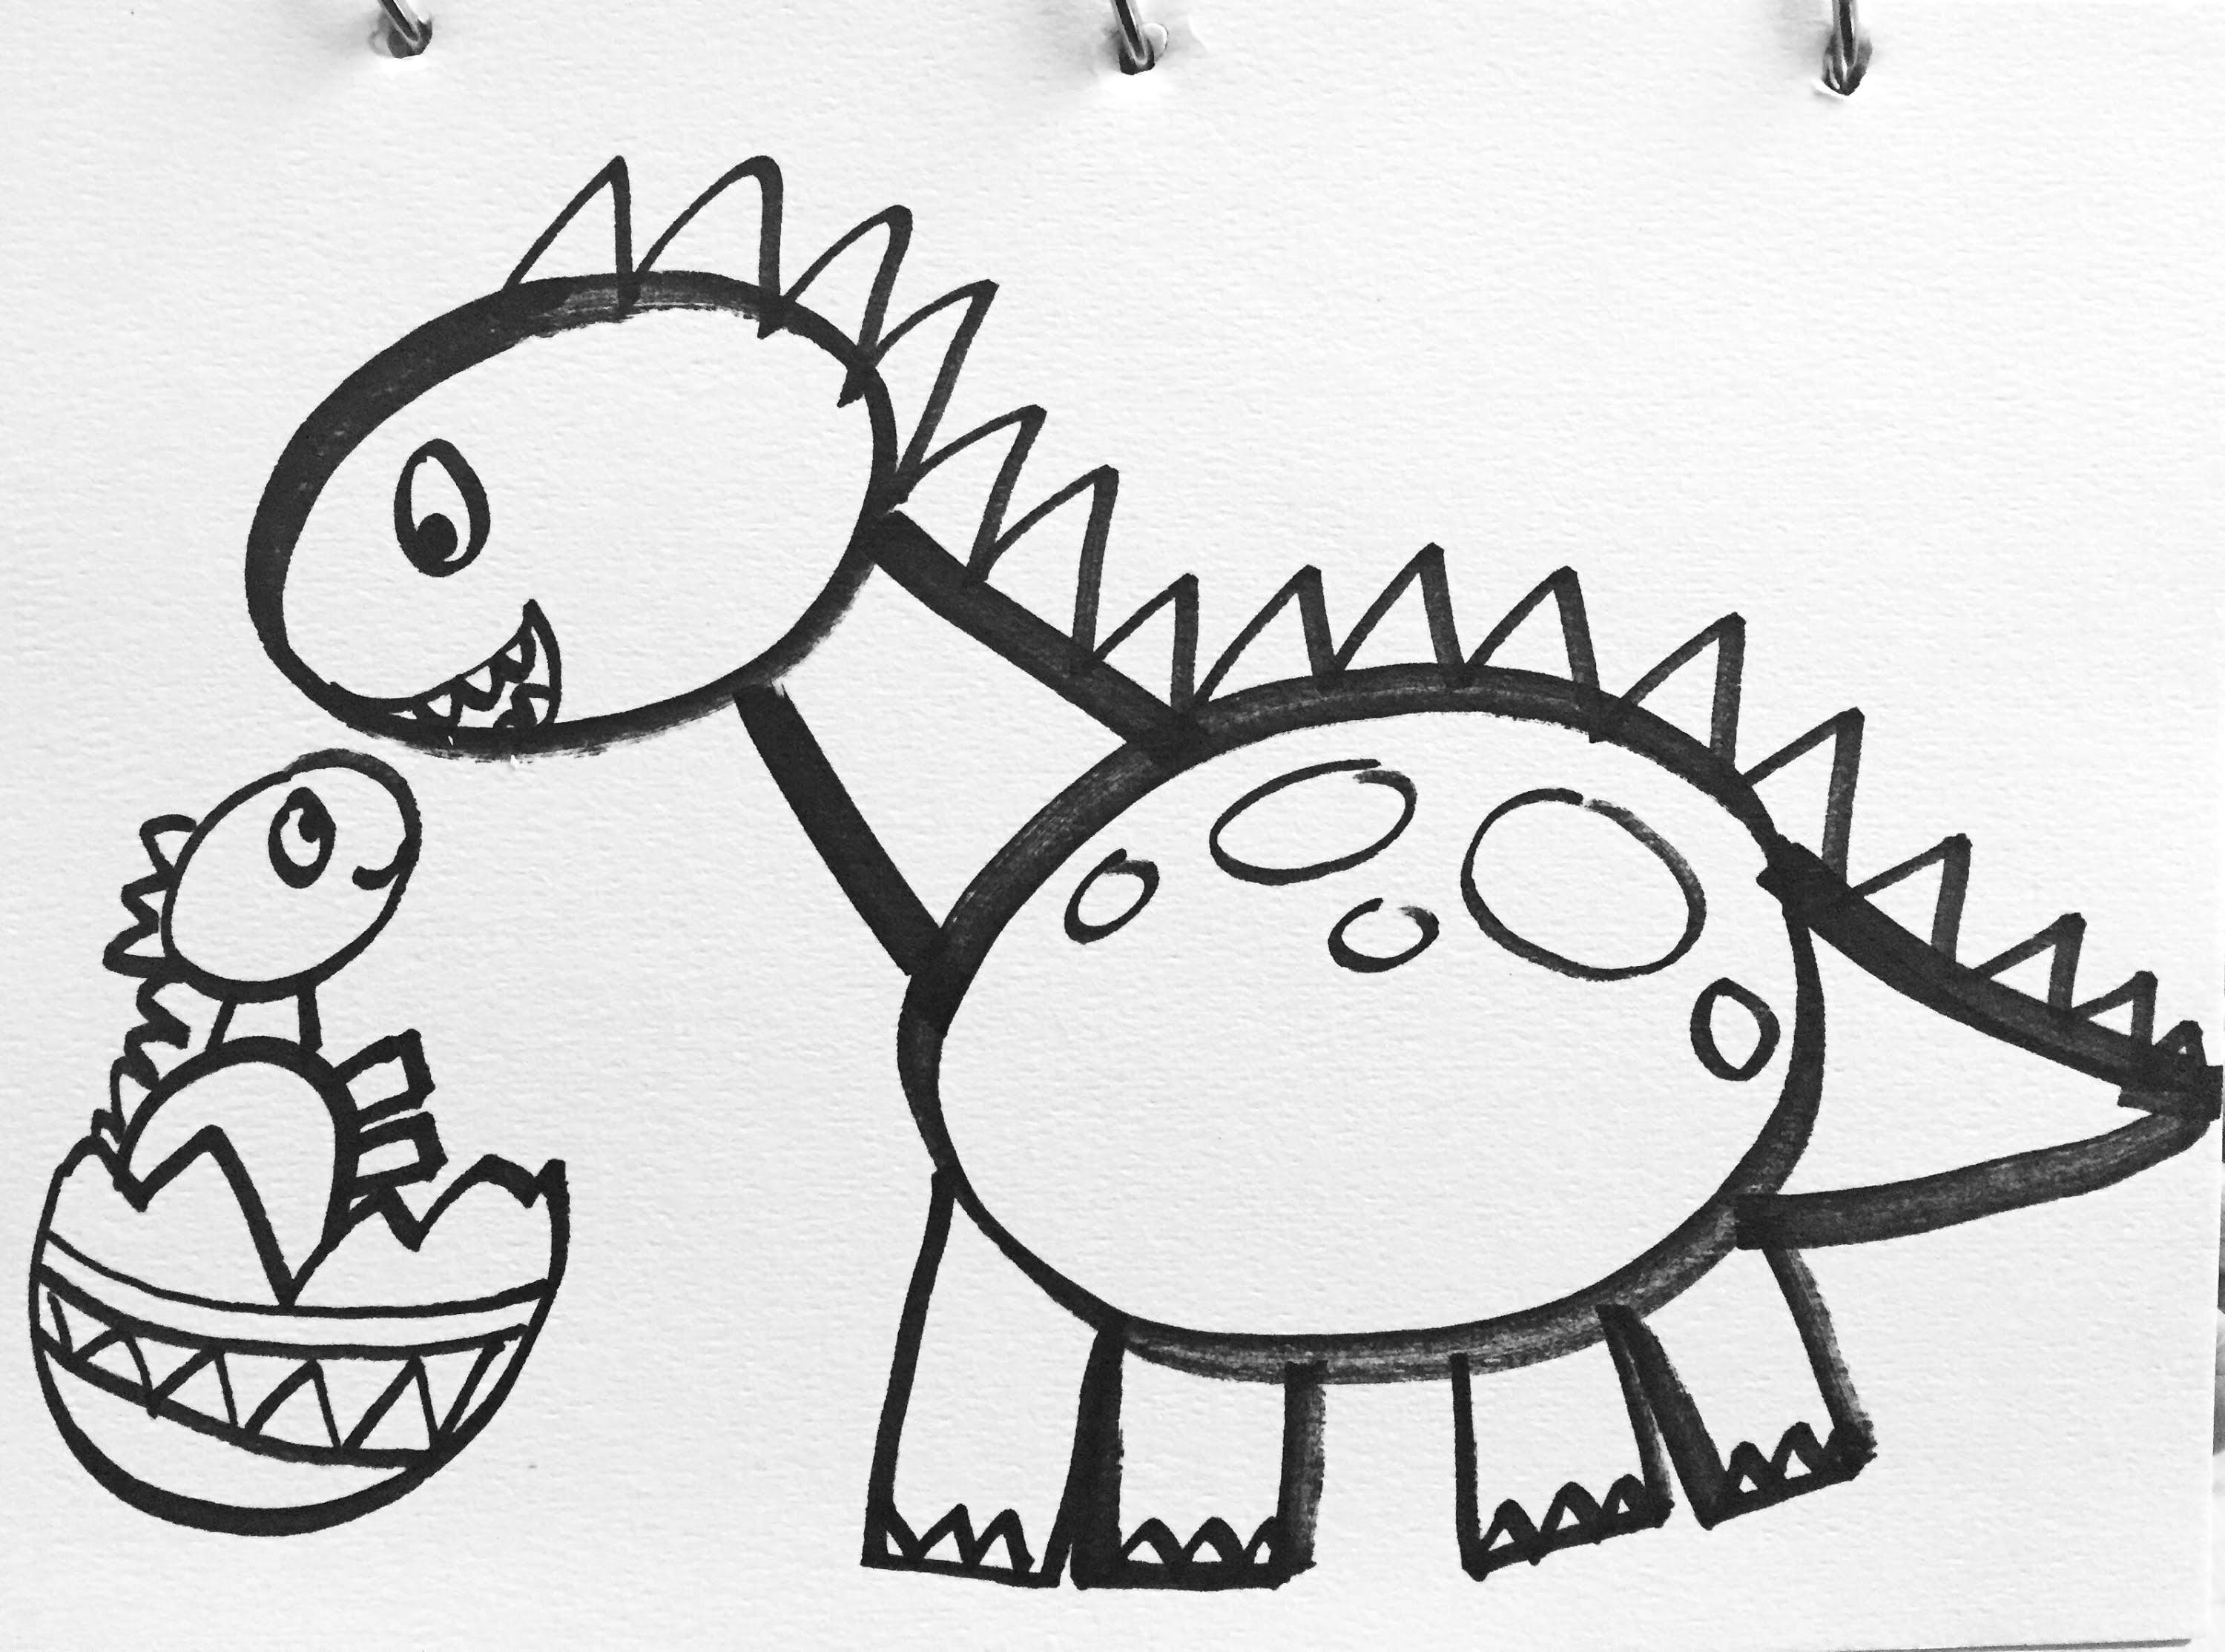 Easy Drawings for 6 Year Olds Tutorial How to Draw A Dinosaur for Kids This is A Simple Lesson